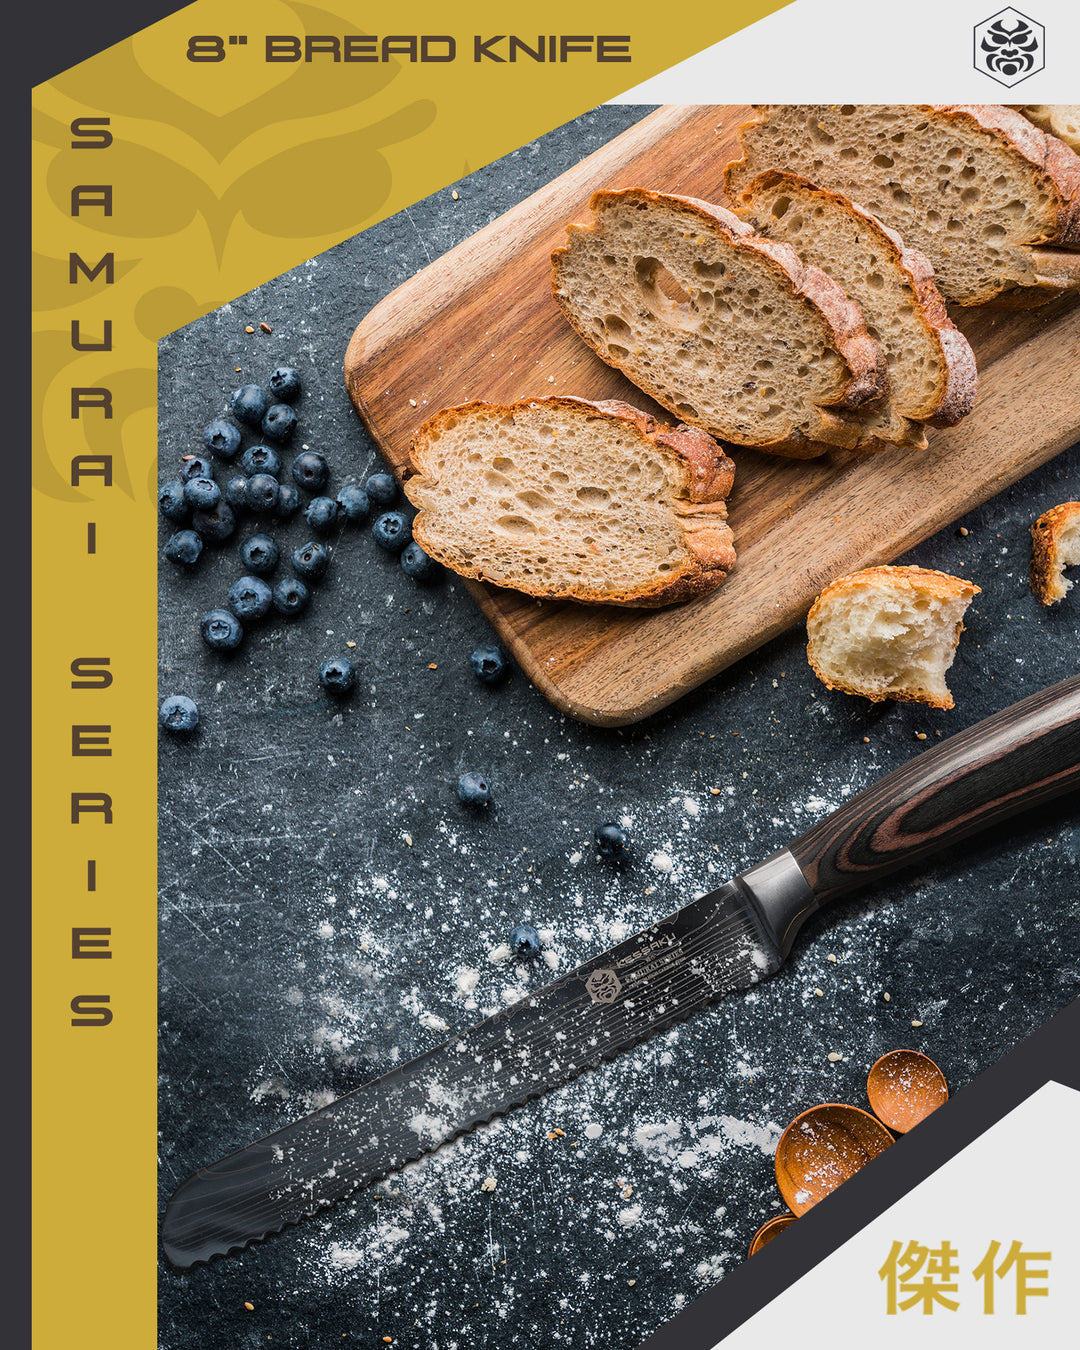 The Samurai Bread Knife among sliced baguette, blueberries, and powdered sugar